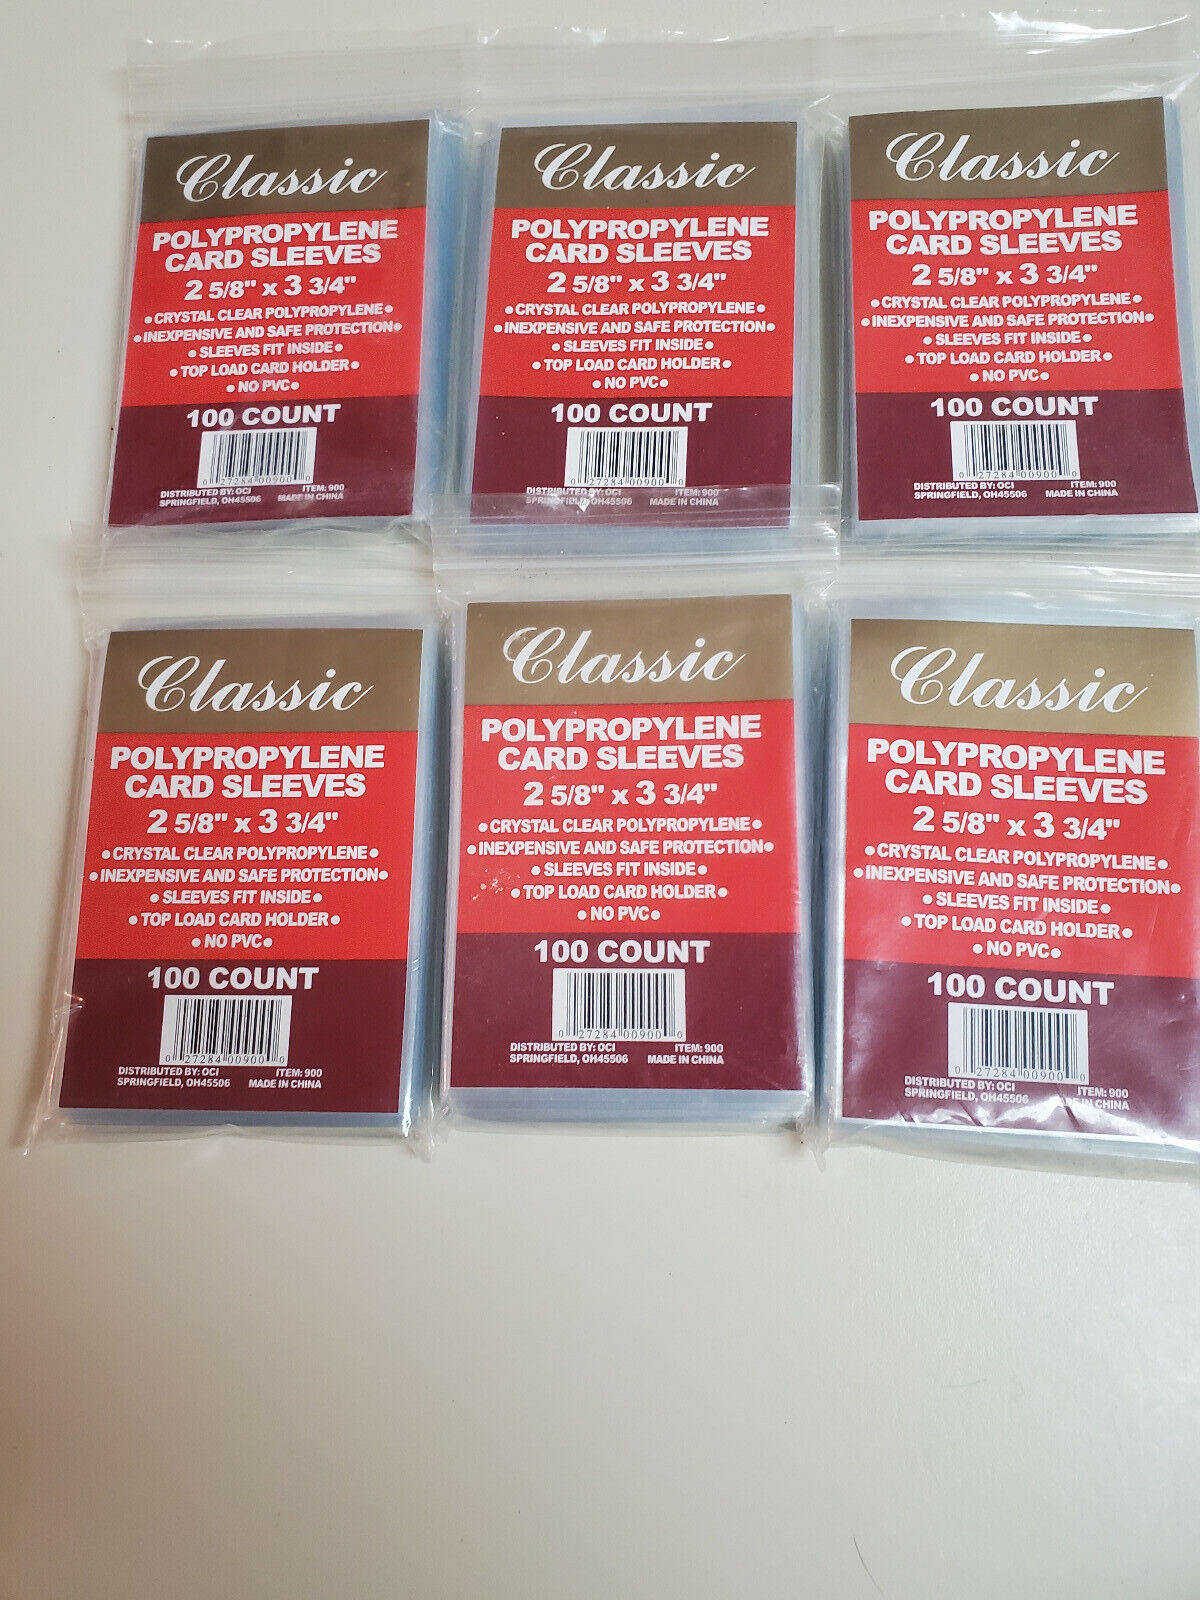 Outstanding 600 Classic card sleeves loads top Product fit standard